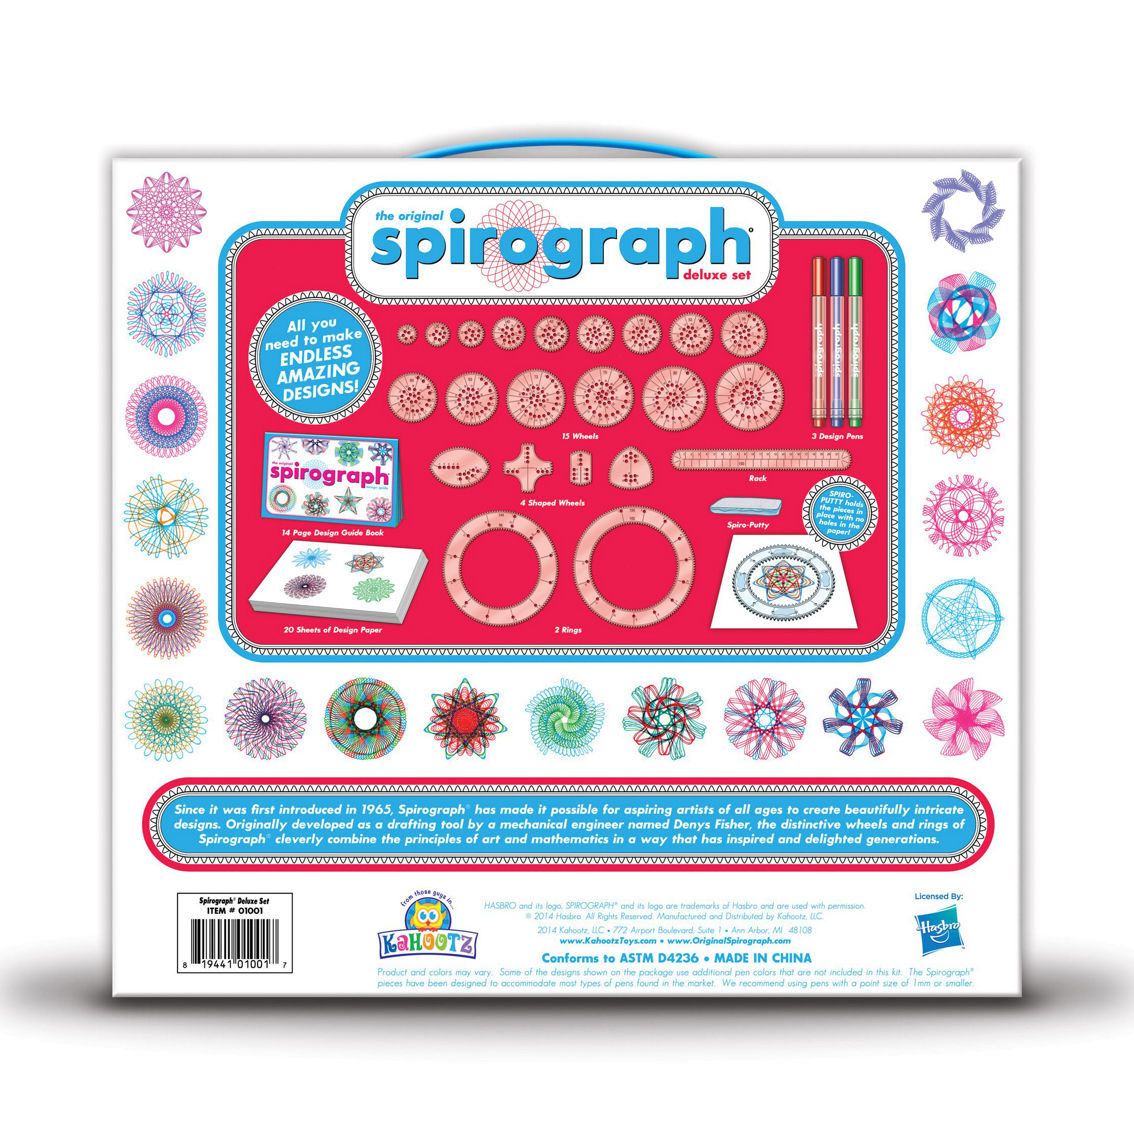 Spirograph Deluxe Set - Image 3 of 3